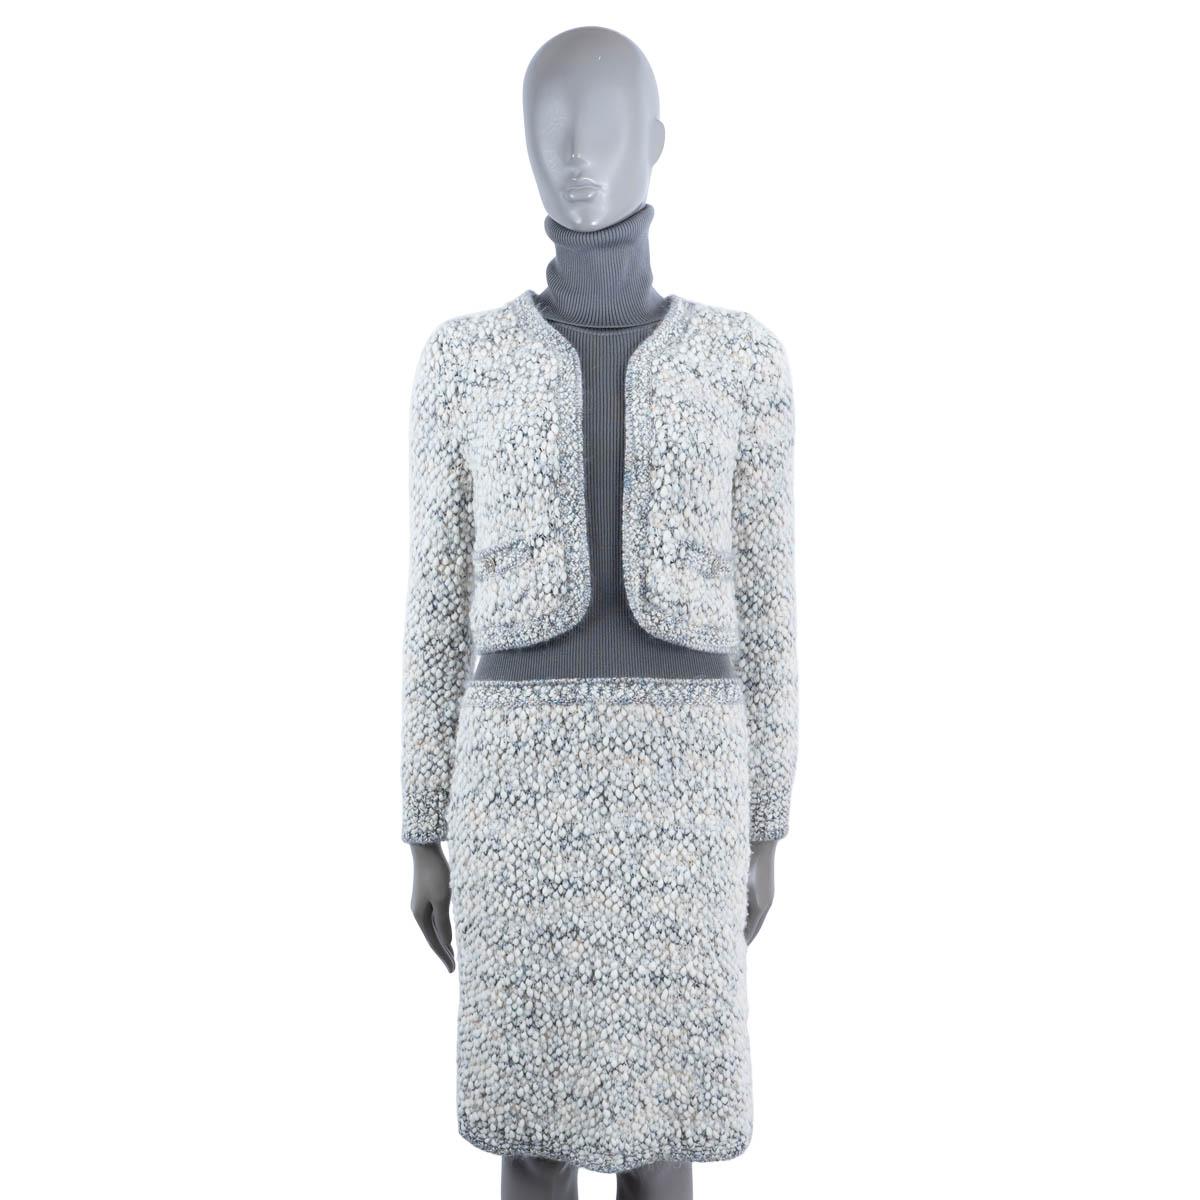 Women's CHANEL silver grey & white 2016 16A ROME LAYERED BOUCLE Dress 38 S For Sale